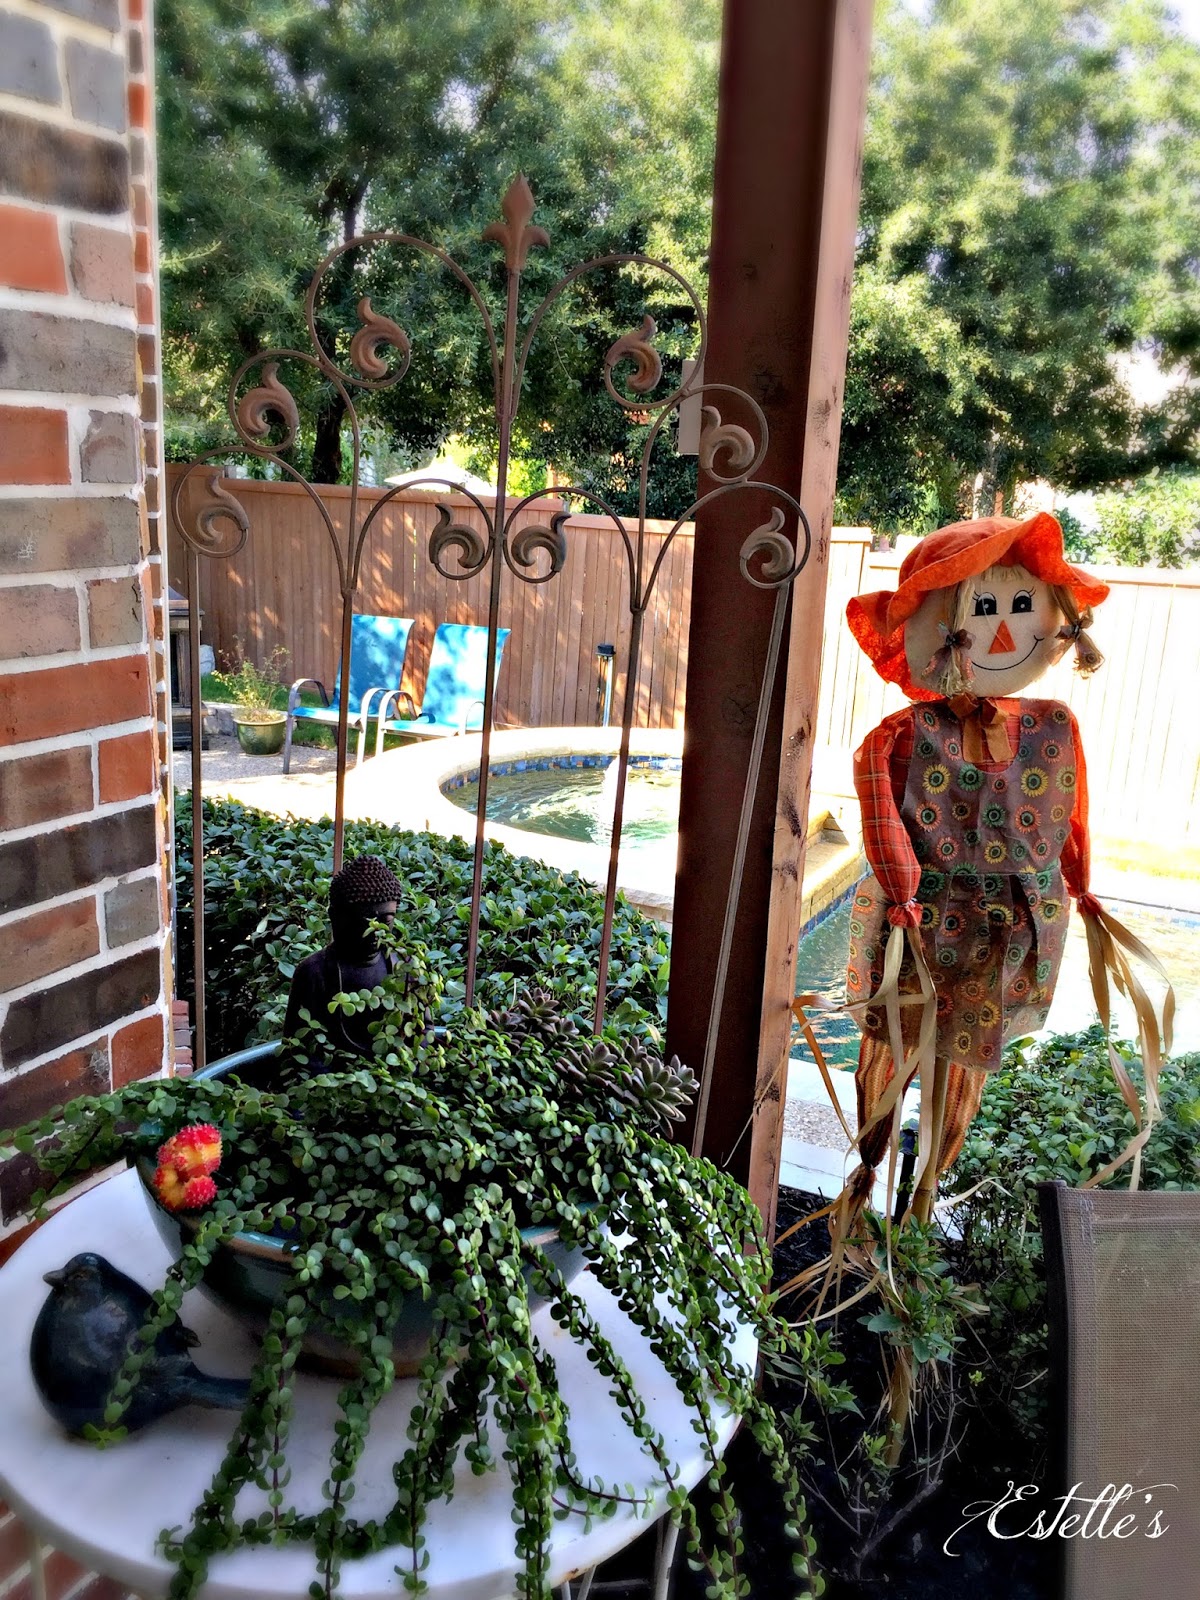 Estelle's: DECORATING FOR AUTUMN INSIDE AND OUT!